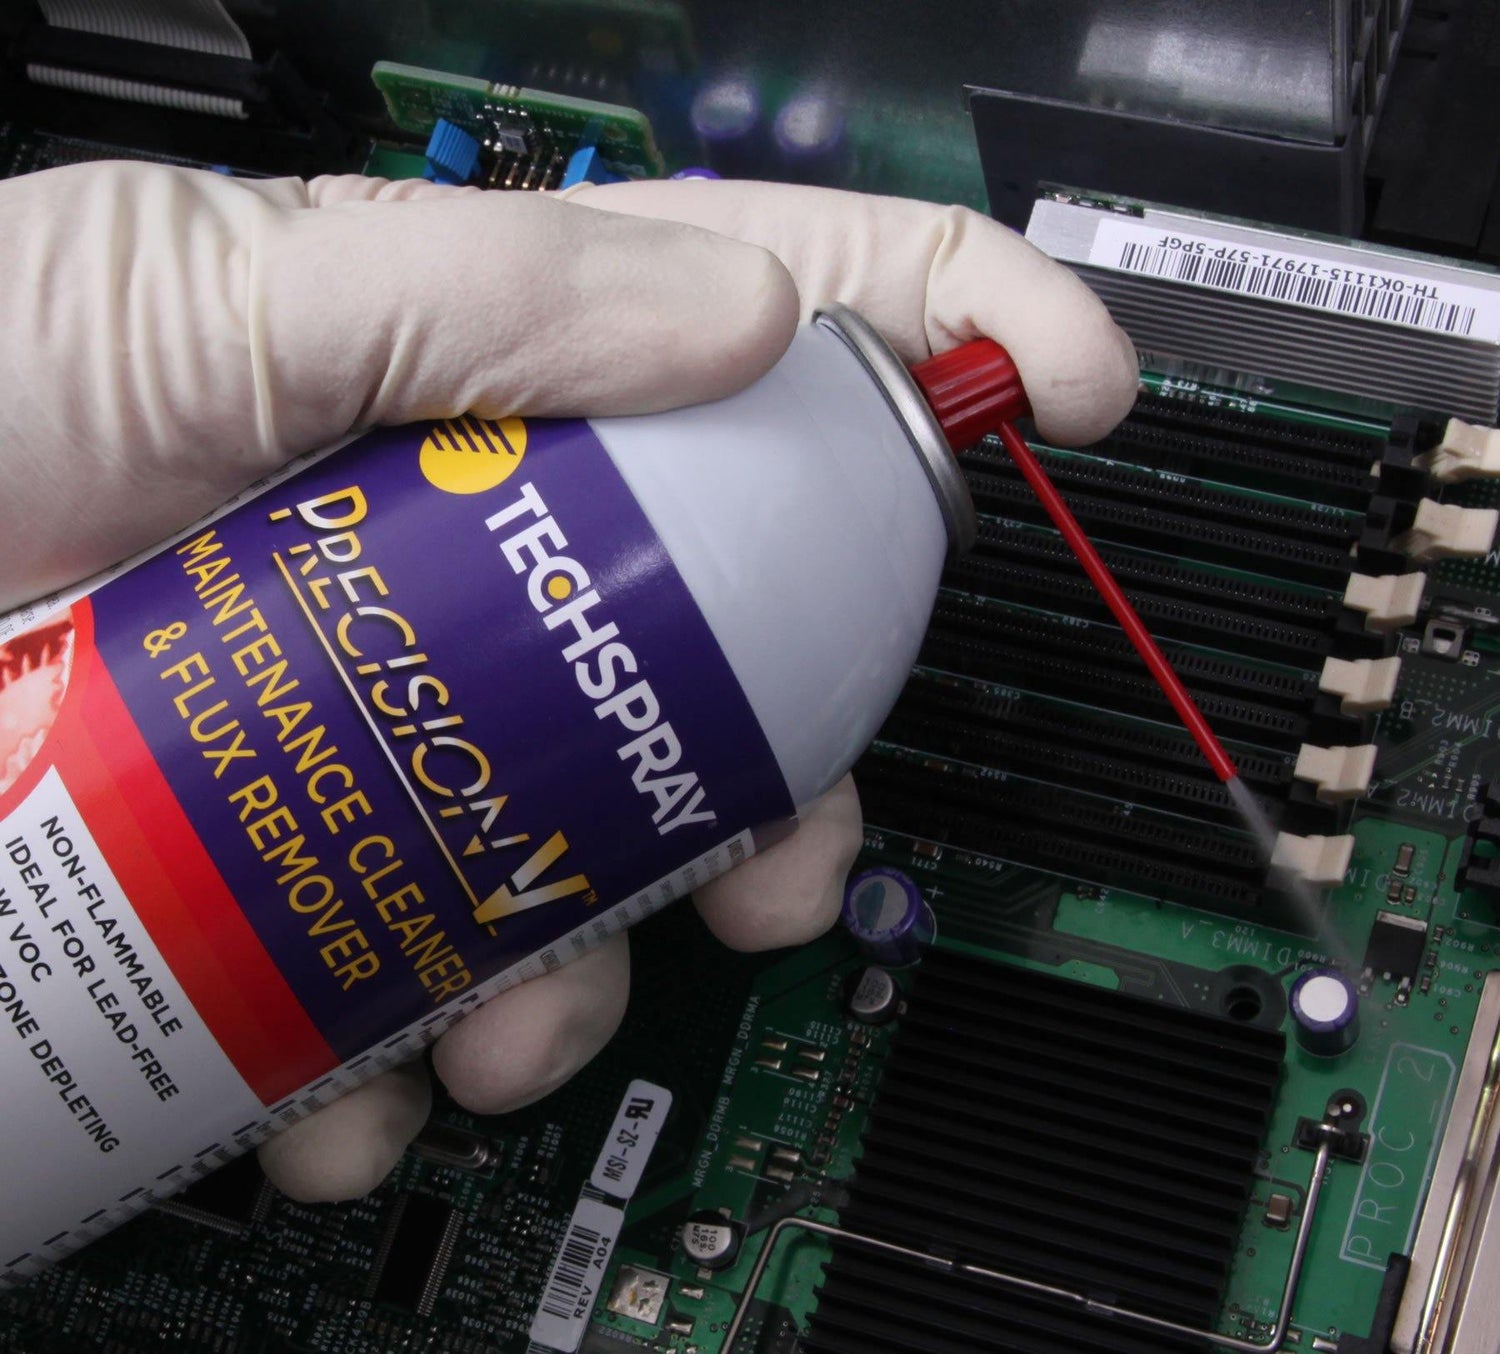 Techspray Precision-V Flux Remover cleaning and removing flux on PCB board